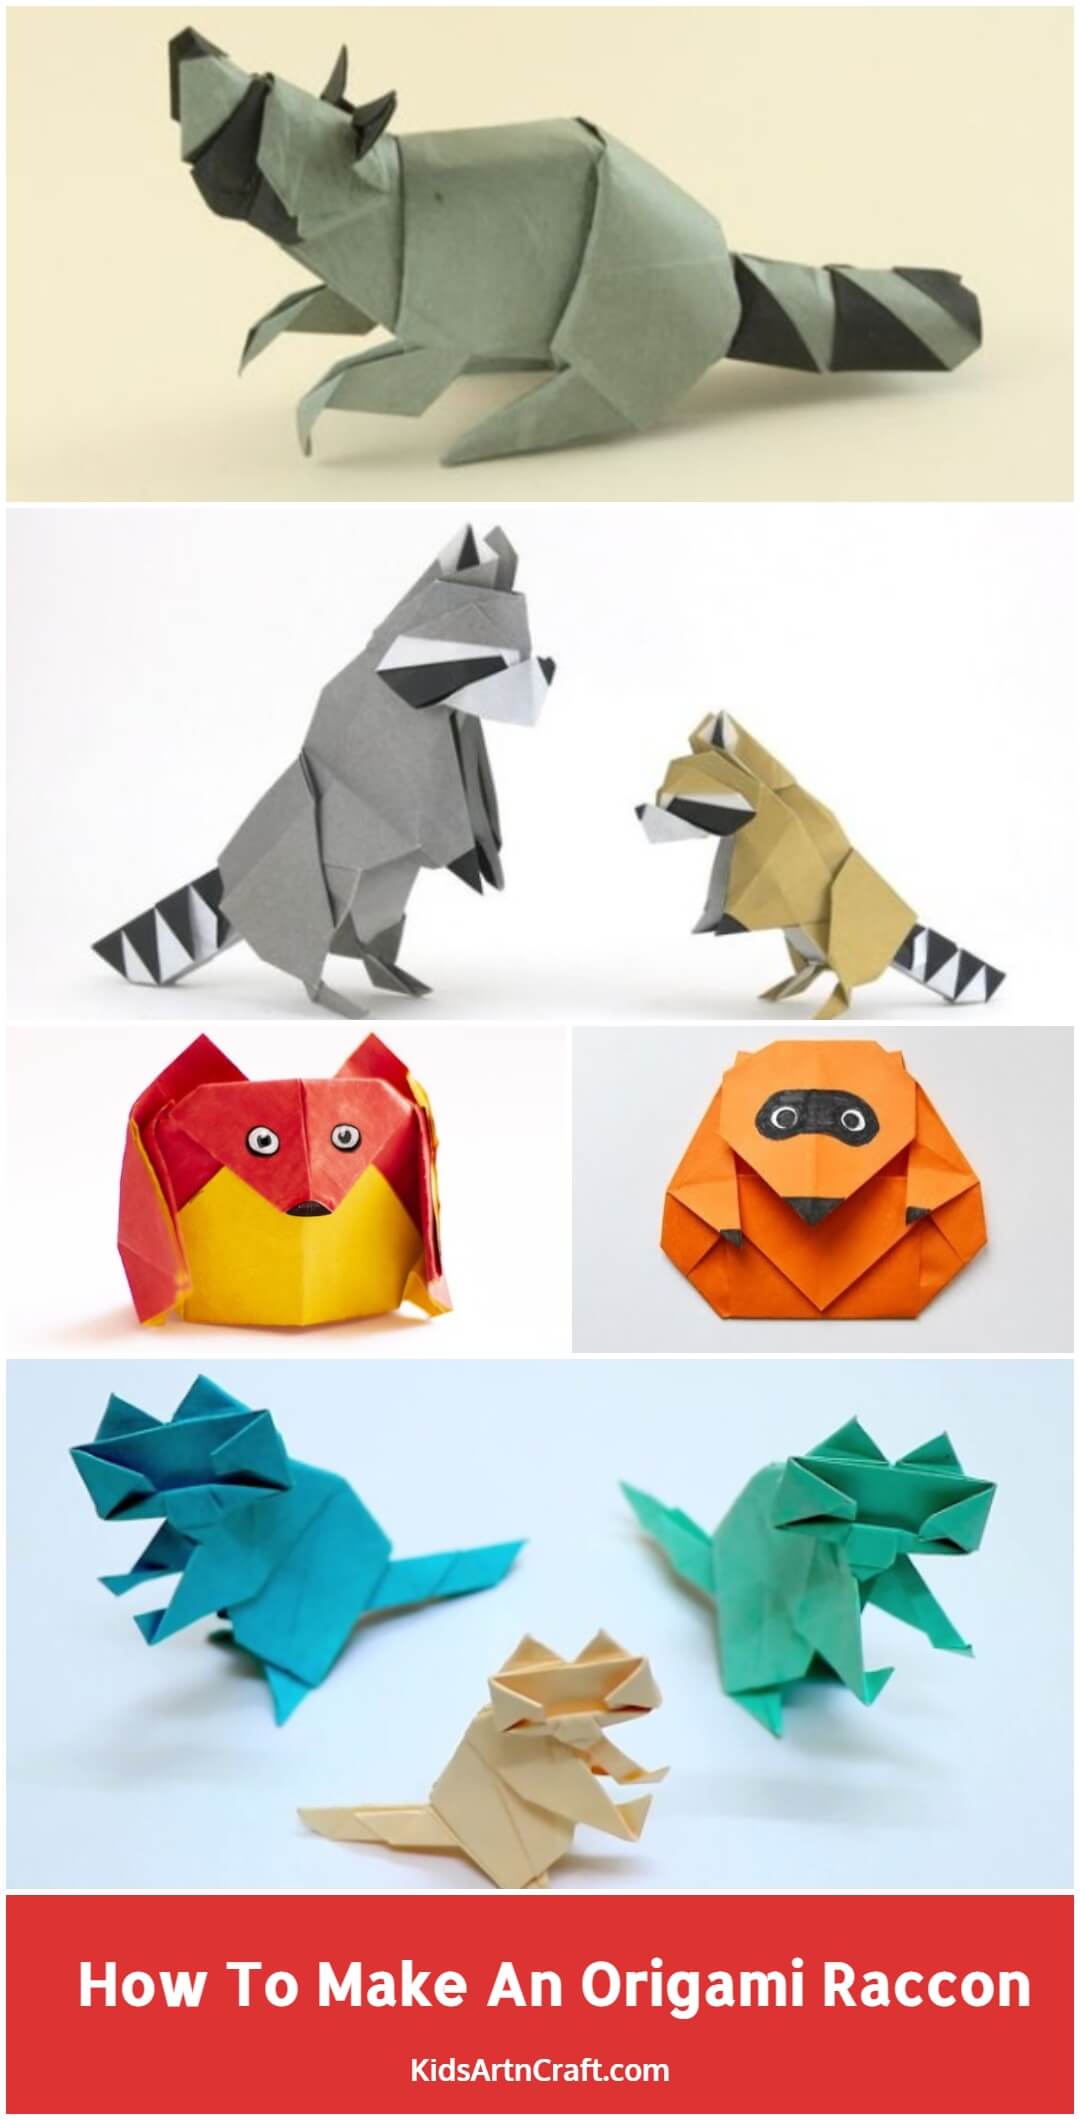 How To Make An Origami Raccoon With Kids